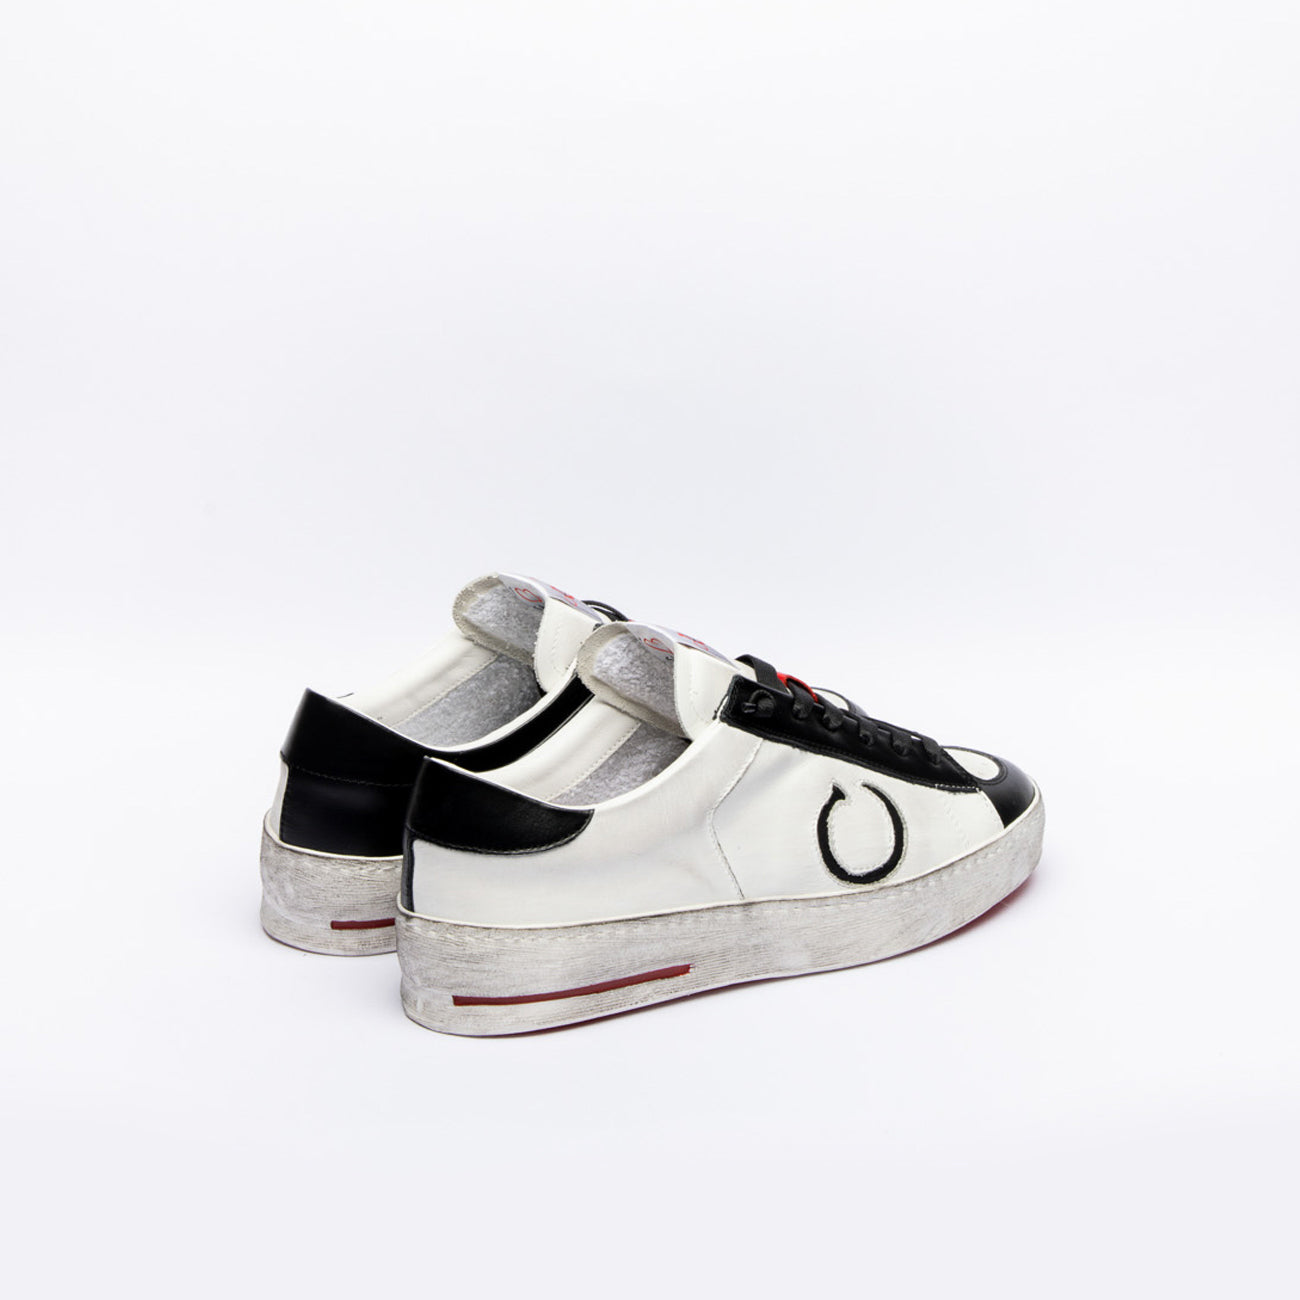 Sneaker Okinawa Basket 2444 in white and black leather